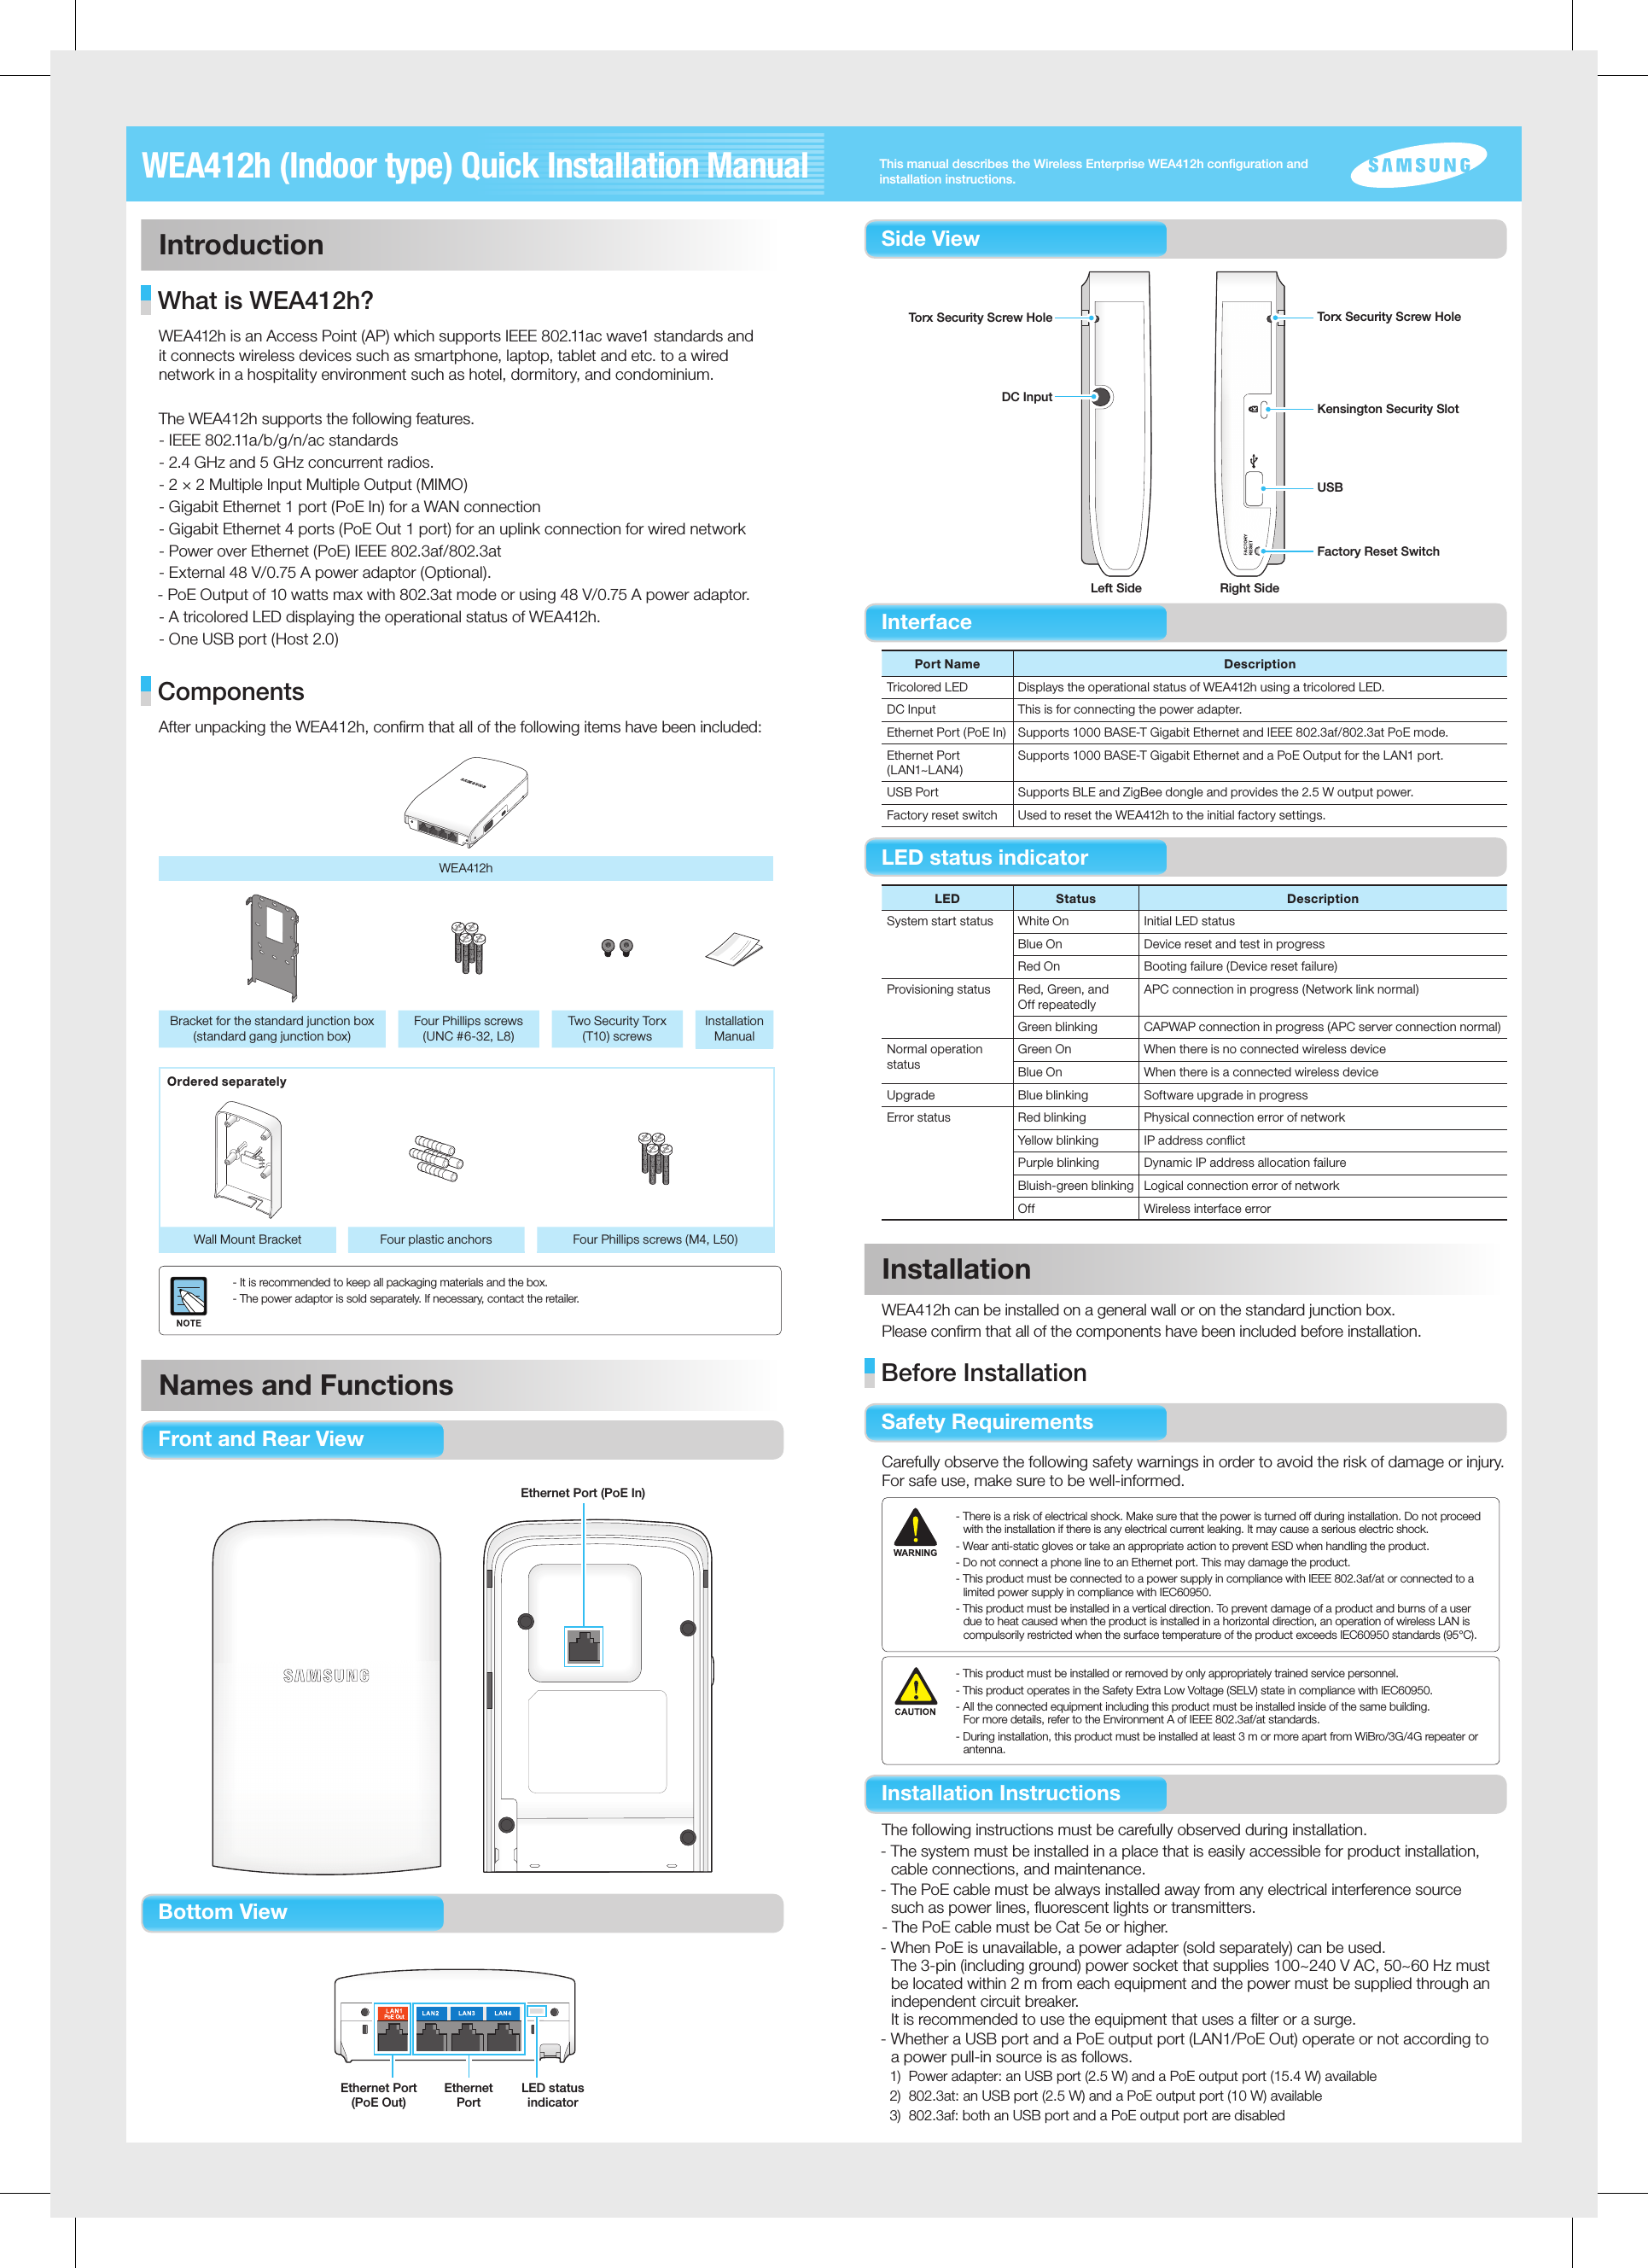 WEA412h (Indoor type) Quick Installation ManualIntroduction What is WEA412h? WEA412h is an Access Point (AP) which supports IEEE 802.11ac wave1 standards and it connects wireless devices such as smartphone, laptop, tablet and etc. to a wired network in a hospitality environment such as hotel, dormitory, and condominium. The WEA412h supports the following features. - IEEE 802.11a/b/g/n/ac standards - 2.4 GHz and 5 GHz concurrent radios.- 2 × 2 Multiple Input Multiple Output (MIMO) - Gigabit Ethernet 1 port (PoE In) for a WAN connection- Gigabit Ethernet 4 ports (PoE Out 1 port) for an uplink connection for wired network - Power over Ethernet (PoE) IEEE 802.3af/802.3at - External 48 V/0.75 A power adaptor (Optional).- PoE Output of 10 watts max with 802.3at mode or using 48 V/0.75 A power adaptor.- A tricolored LED displaying the operational status of WEA412h. - One USB port (Host 2.0)  ComponentsAfter unpacking the WEA412h, conﬁrm that all of the following items have been included:WE A412h Bracket for the standard junction box (standard gang junction box)Four Phillips screws (UNC #6-32, L8)Two Security Torx  (T10) screws Installation ManualOrdered separately Wall Mount Bracket  Four plastic anchors Four Phillips screws (M4, L50)- It is recommended to keep all packaging materials and the box. - The power adaptor is sold separately. If necessary, contact the retailer.Names and FunctionsFront and Rear ViewEthernet Port (PoE In)Bottom ViewEthernet Port(PoE Out)Ethernet PortLED status indicatorSide ViewTorx Security Screw HoleKensington Security SlotUSBFactory Reset SwitchRight SideTorx Security Screw HoleDC InputLeft SideInterfacePort Name  DescriptionTricolored LED Displays the operational status of WEA412h using a tricolored LED.DC Input This is for connecting the power adapter.Ethernet Port (PoE In) Supports 1000 BASE-T Gigabit Ethernet and IEEE 802.3af/802.3at PoE mode.Ethernet Port (LAN1~LAN4)Supports 1000 BASE-T Gigabit Ethernet and a PoE Output for the LAN1 port.USB Port Supports BLE and ZigBee dongle and provides the 2.5 W output power.Factory reset switch Used to reset the WEA412h to the initial factory settings.LED status indicatorLED Status DescriptionSystem start status  White On Initial LED statusBlue On Device reset and test in progressRed On Booting failure (Device reset failure)Provisioning status Red, Green, and  Off repeatedlyAPC connection in progress (Network link normal)Green blinking CAPWAP connection in progress (APC server connection normal)Normal operation status Green On When there is no connected wireless deviceBlue On When there is a connected wireless deviceUpgrade Blue blinking Software upgrade in progressError status Red blinking Physical connection error of networkYellow blinking IP address conﬂictPurple blinking Dynamic IP address allocation failureBluish-green blinking Logical connection error of networkOff Wireless interface errorInstallationWEA412h can be installed on a general wall or on the standard junction box. Please conﬁrm that all of the components have been included before installation.  Before InstallationSafety RequirementsCarefully observe the following safety warnings in order to avoid the risk of damage or injury. For safe use, make sure to be well-informed.- There is a risk of electrical shock. Make sure that the power is turned off during installation. Do not proceed with the installation if there is any electrical current leaking. It may cause a serious electric shock.- Wear anti-static gloves or take an appropriate action to prevent ESD when handling the product.- Do not connect a phone line to an Ethernet port. This may damage the product.- This product must be connected to a power supply in compliance with IEEE 802.3af/at or connected to a limited power supply in compliance with IEC60950.- This product must be installed in a vertical direction. To prevent damage of a product and burns of a user due to heat caused when the product is installed in a horizontal direction, an operation of wireless LAN is compulsorily restricted when the surface temperature of the product exceeds IEC60950 standards (95°C). - This product must be installed or removed by only appropriately trained service personnel.- This product operates in the Safety Extra Low Voltage (SELV) state in compliance with IEC60950.- All the connected equipment including this product must be installed inside of the same building.  For more details, refer to the Environment A of IEEE 802.3af/at standards.- During installation, this product must be installed at least 3 m or more apart from WiBro/3G/4G repeater or antenna.Installation InstructionsThe following instructions must be carefully observed during installation.- The system must be installed in a place that is easily accessible for product installation, cable connections, and maintenance.- The PoE cable must be always installed away from any electrical interference source such as power lines, ﬂuorescent lights or transmitters.- The PoE cable must be Cat 5e or higher.- When PoE is unavailable, a power adapter (sold separately) can be used.  The 3-pin (including ground) power socket that supplies 100~240 V AC, 50~60 Hz must be located within 2 m from each equipment and the power must be supplied through an independent circuit breaker. It is recommended to use the equipment that uses a ﬁlter or a surge.- Whether a USB port and a PoE output port (LAN1/PoE Out) operate or not according to a power pull-in source is as follows.  1)  Power adapter: an USB port (2.5 W) and a PoE output port (15.4 W) available  2)  802.3at: an USB port (2.5 W) and a PoE output port (10 W) available  3)  802.3af: both an USB port and a PoE output port are disabledThis manual describes the Wireless Enterprise WEA412h conﬁguration and installation instructions.